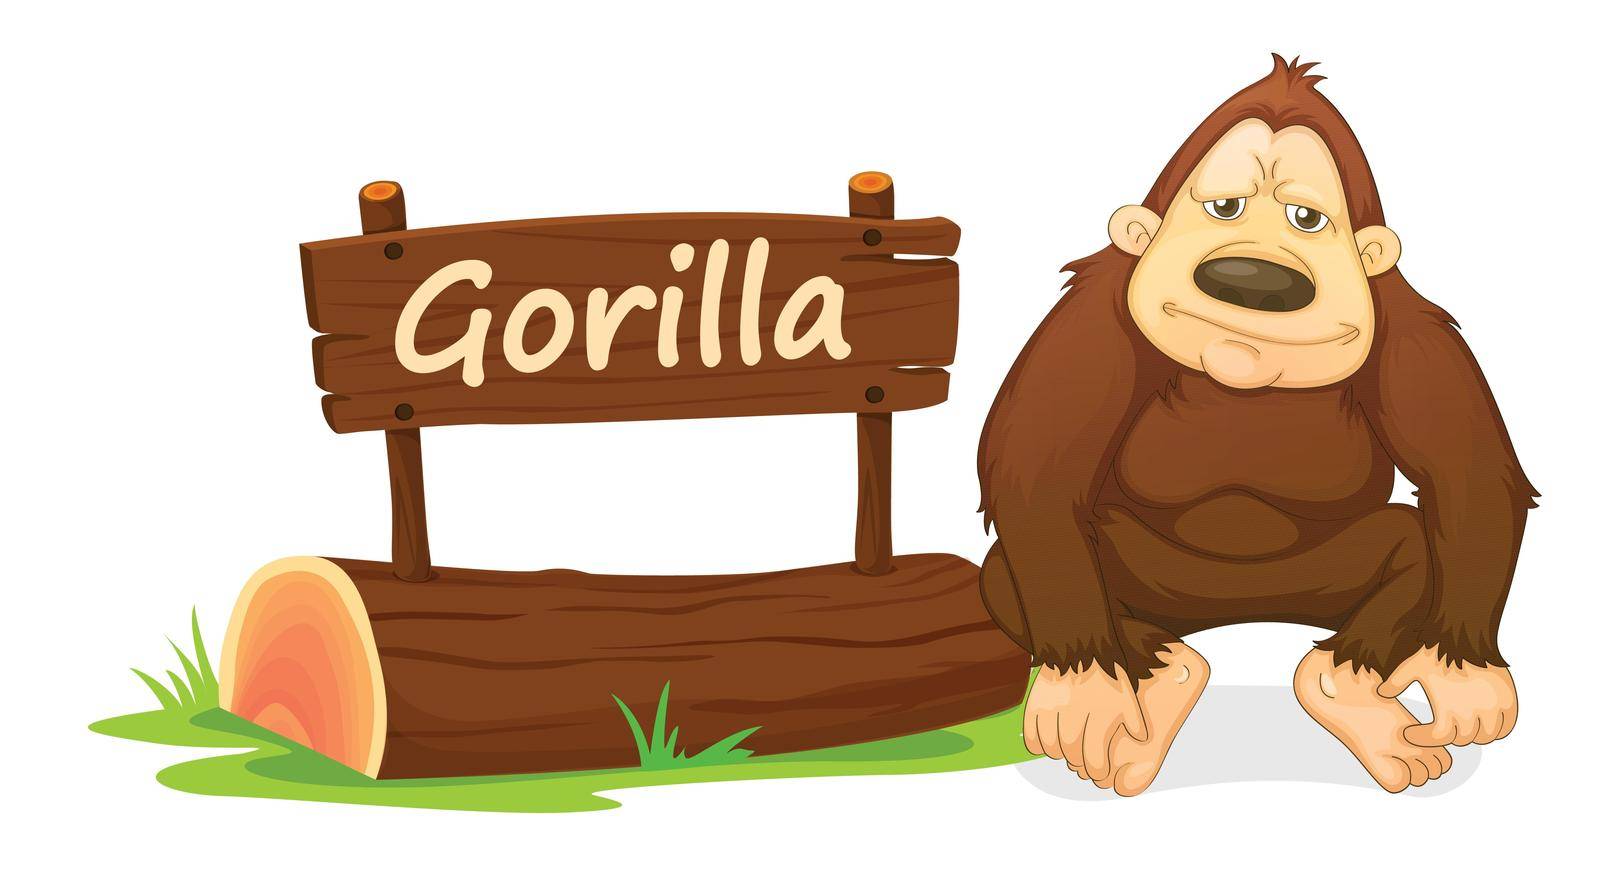 illustration of gorilla and name plate on a white